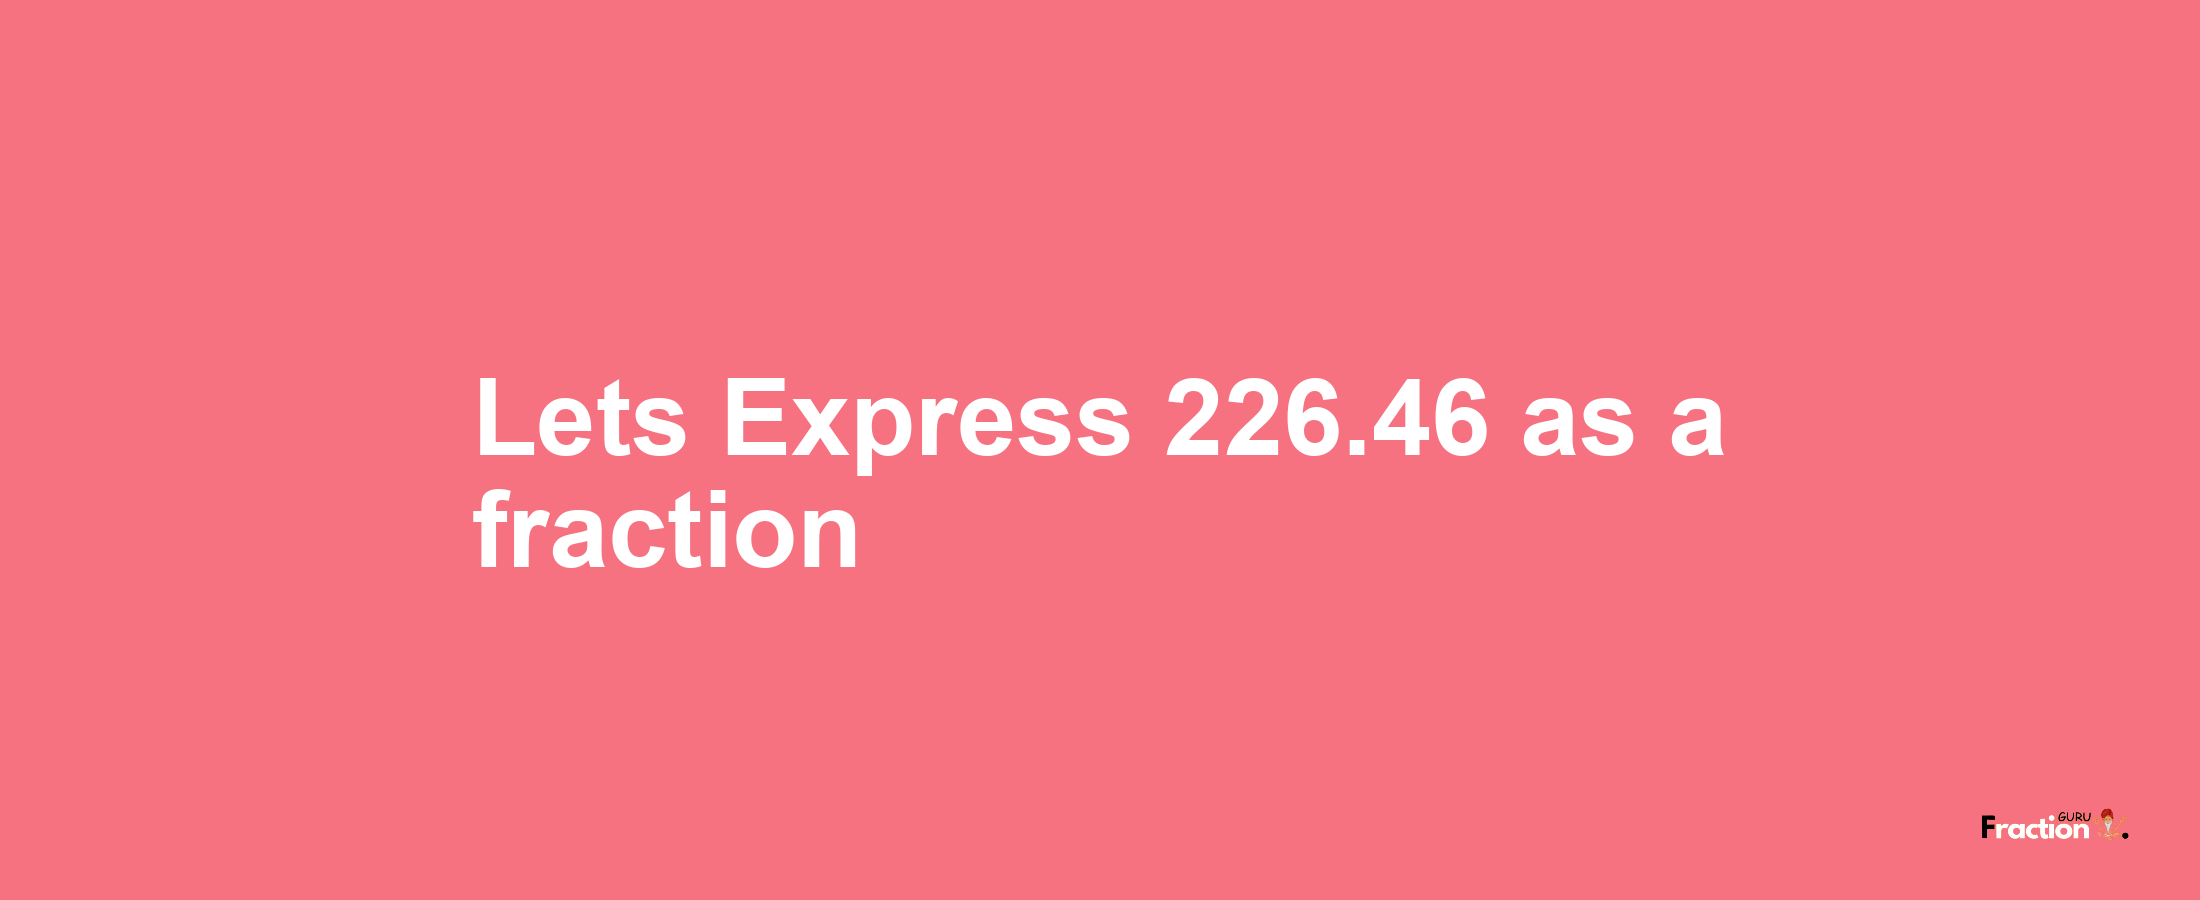 Lets Express 226.46 as afraction